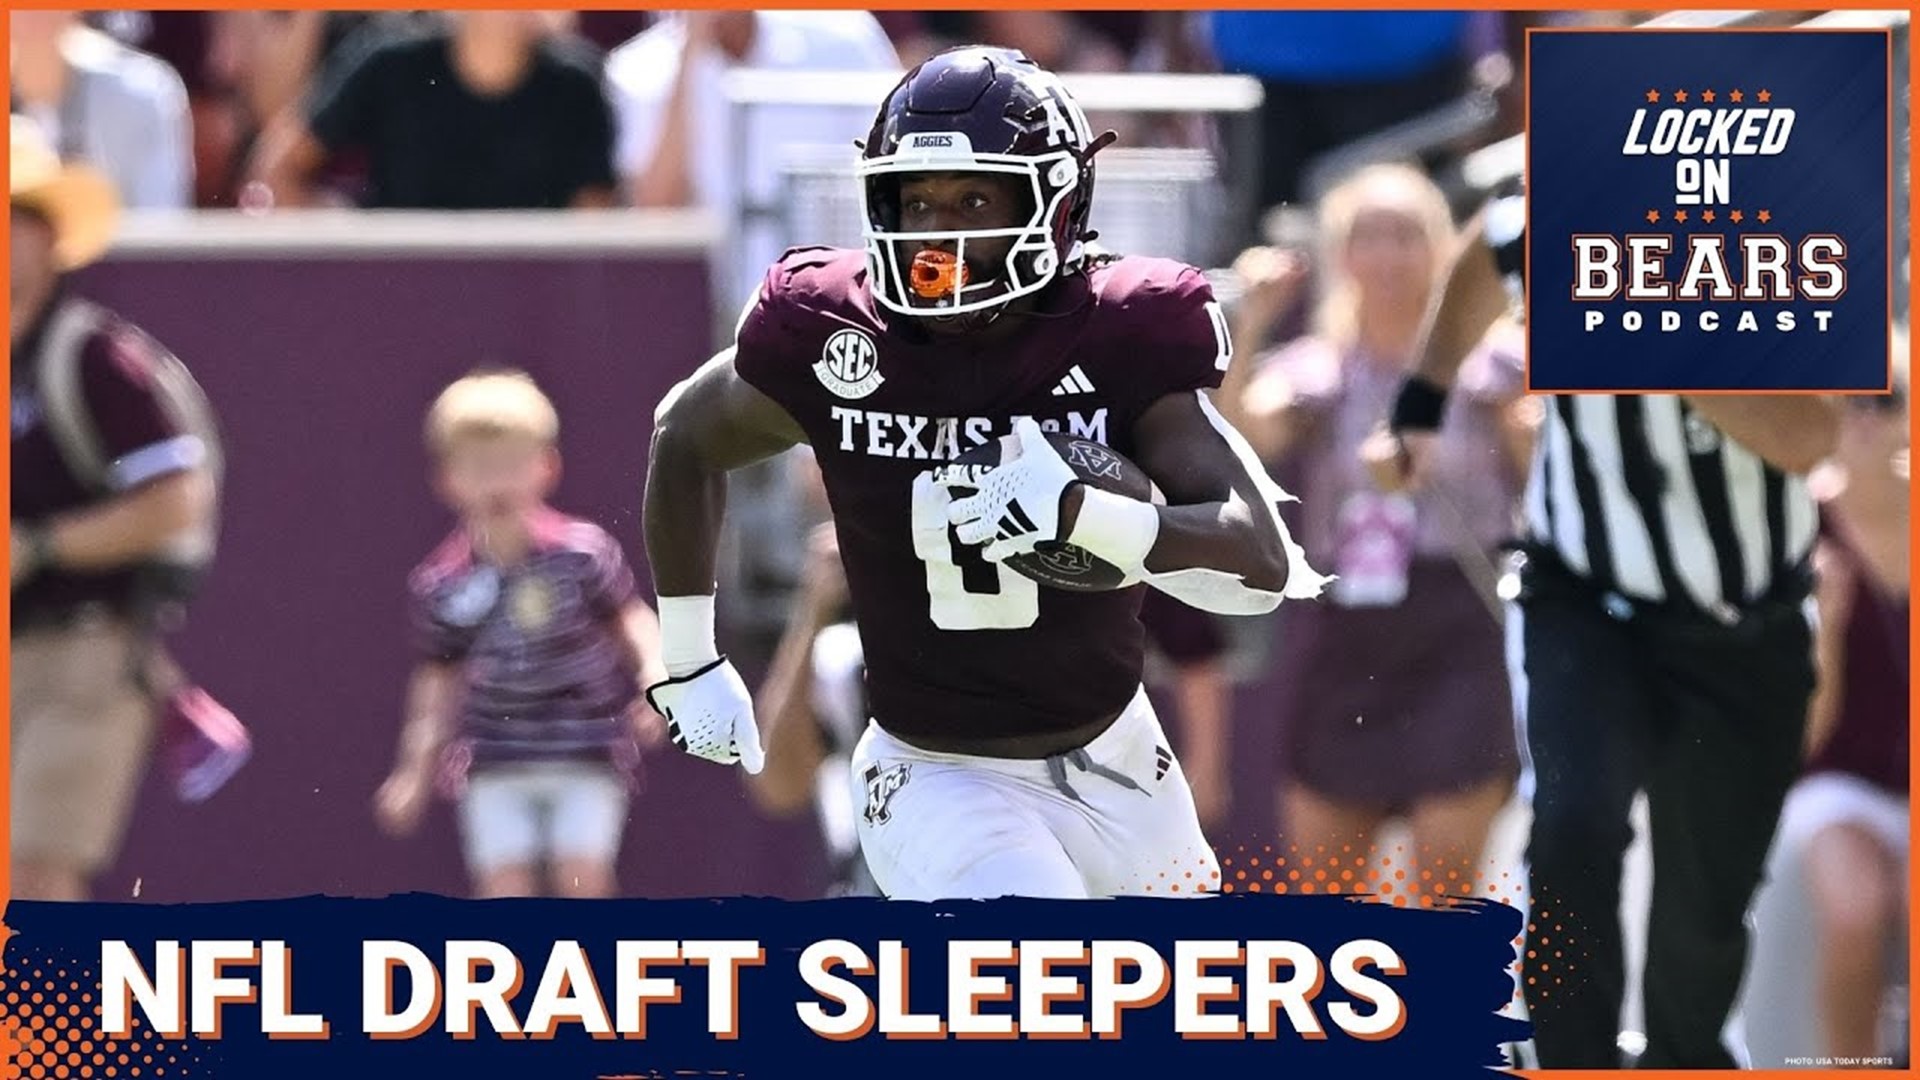 This upcoming NFL Draft class has a lot of depth at wide receiver and offensive line, plus some athletic defensive linemen that could develop into pass rushers